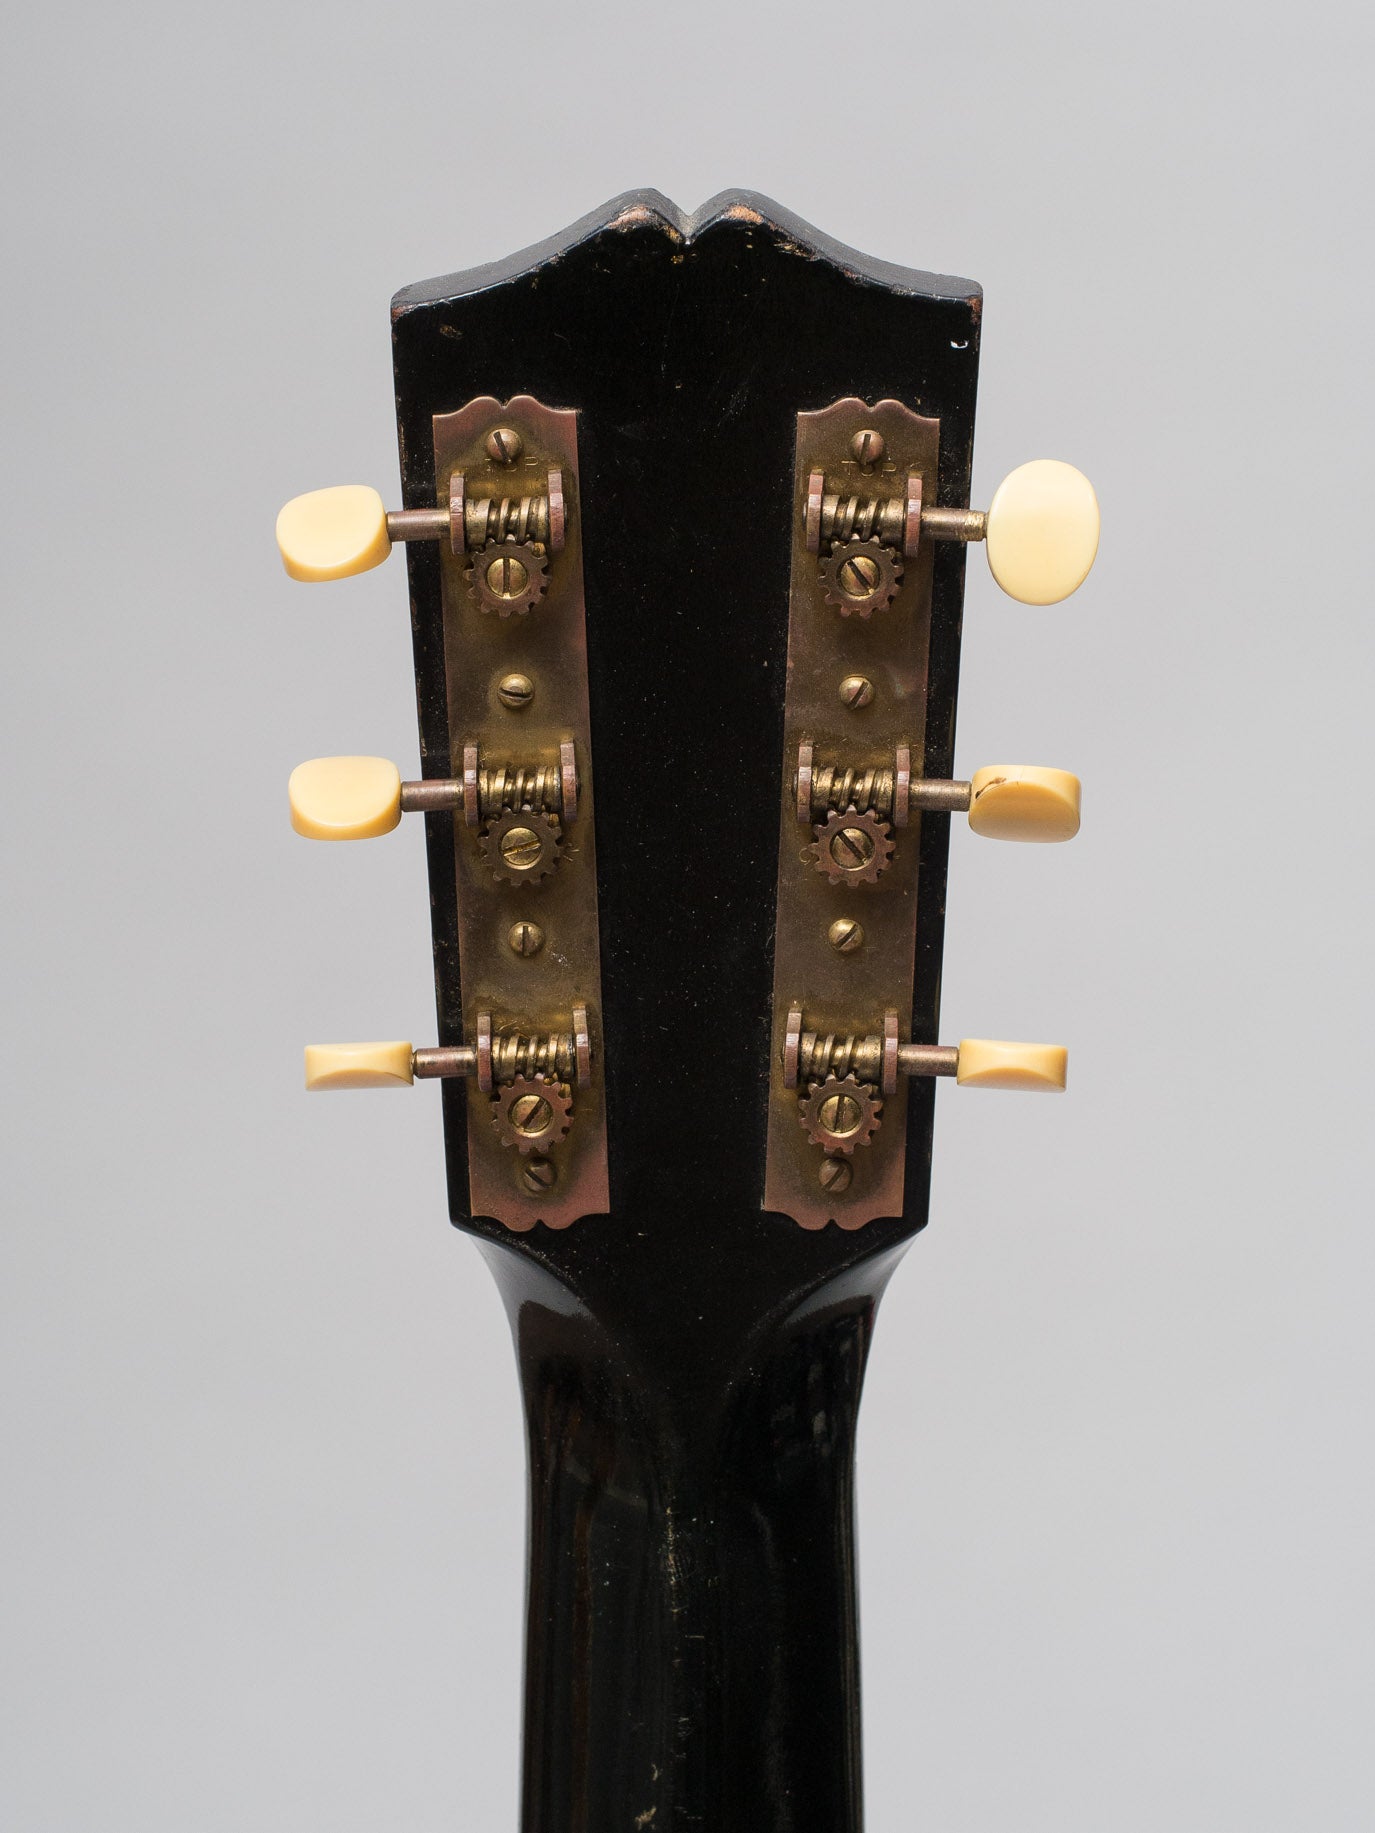 1936 Gibson L-00 Maple Sides